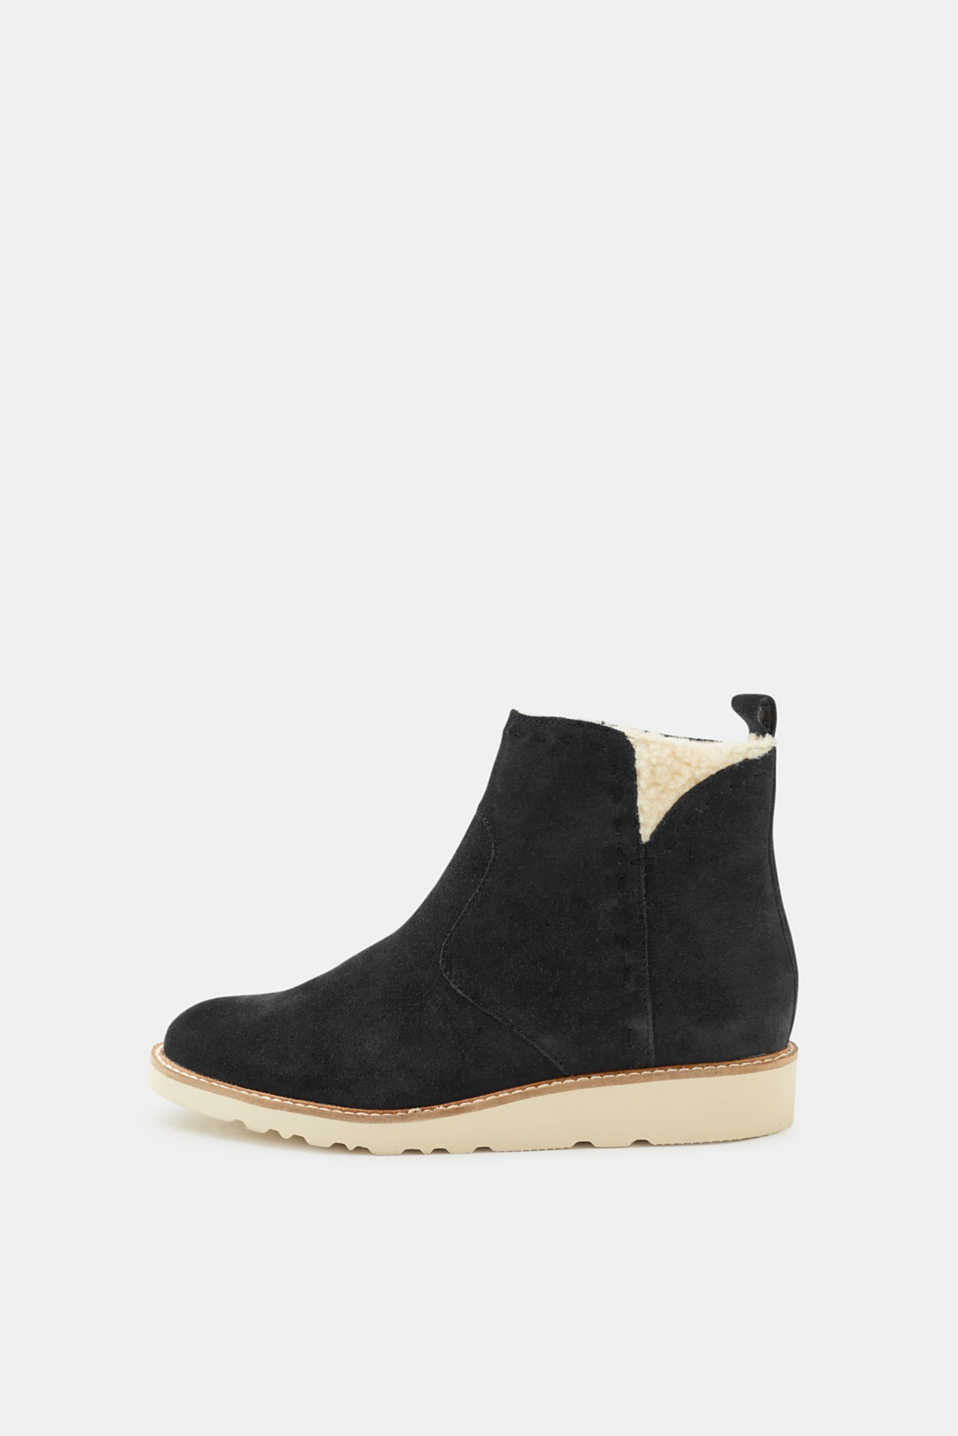 Esprit - Leather boots with teddy fur lining